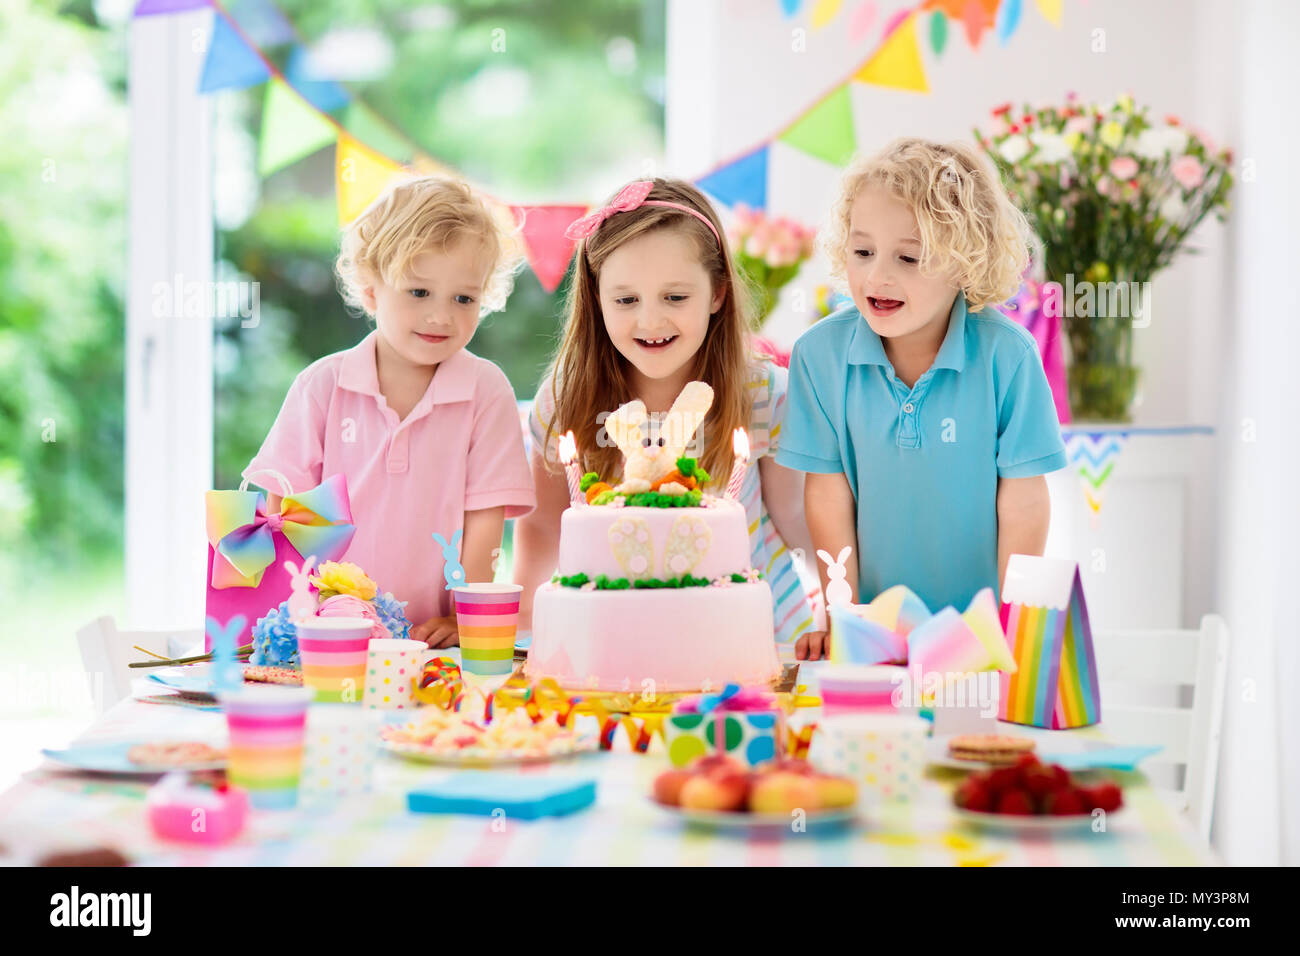 Kids birthday party. Children blow out candles on pink bunny cake. Pastel rainbow decoration and table setting for kids event, banner and flag. Girl a Stock Photo